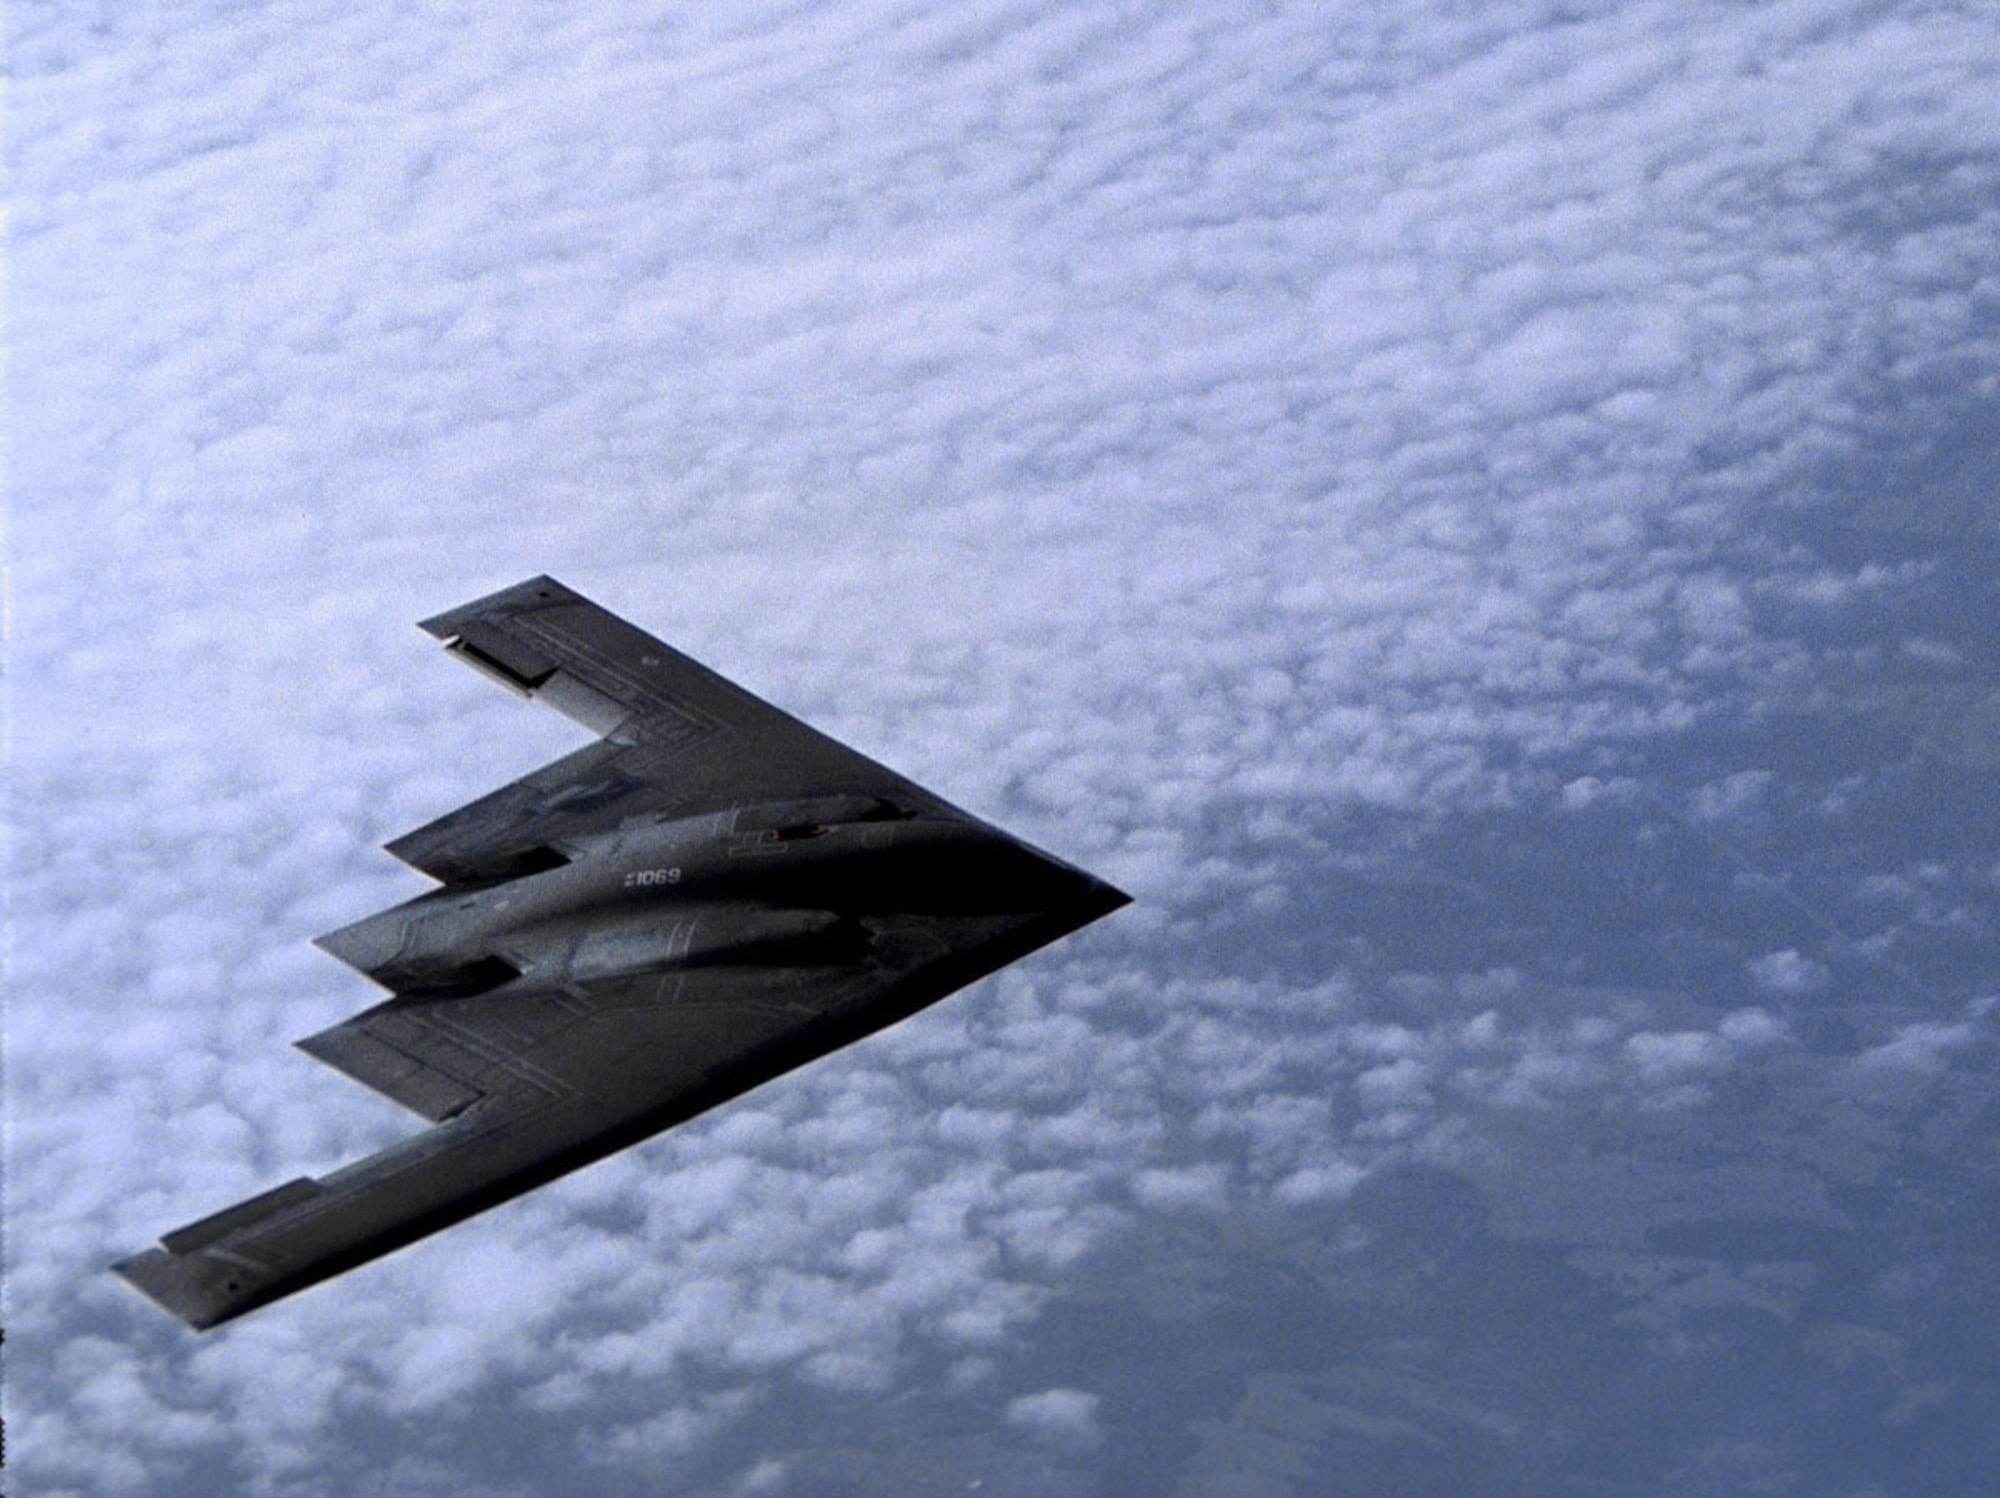 B-2 Spirit > Air Force Nuclear Weapons Center > Fact Sheets